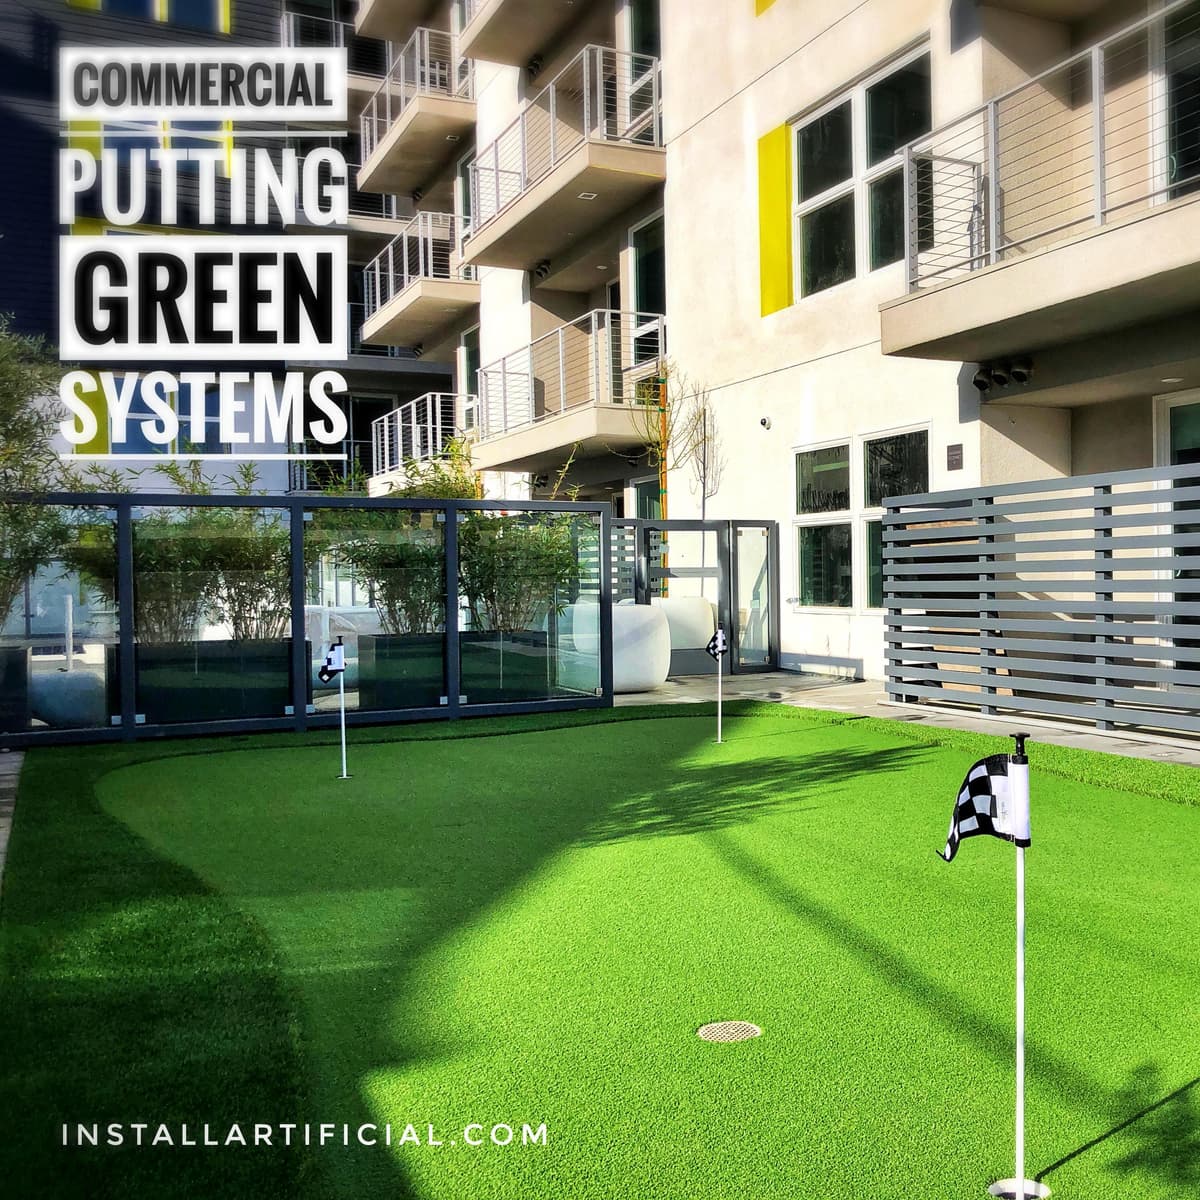 Putting green installed over concrete surface at condominium